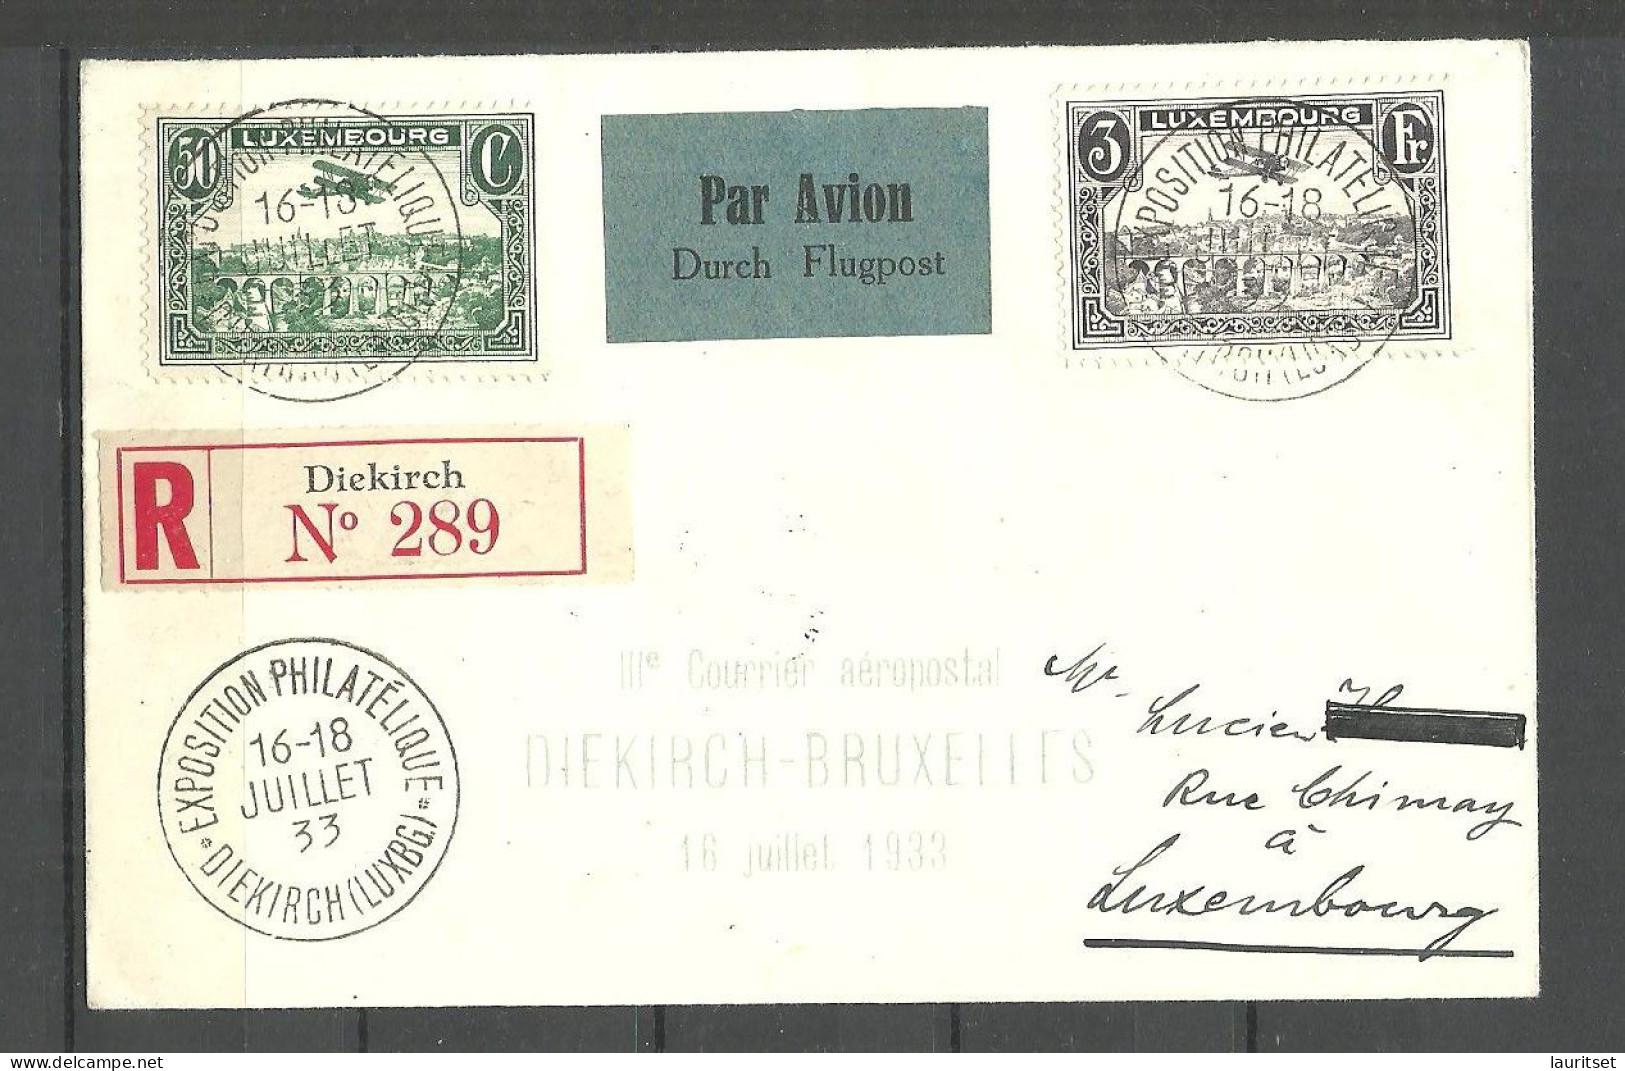 LUXEMBOURG Luxemburg 1933 Registered Air Mail Cover Diekirch Expostition Philatelique Special Cancel Mi 250 - 251 - Covers & Documents